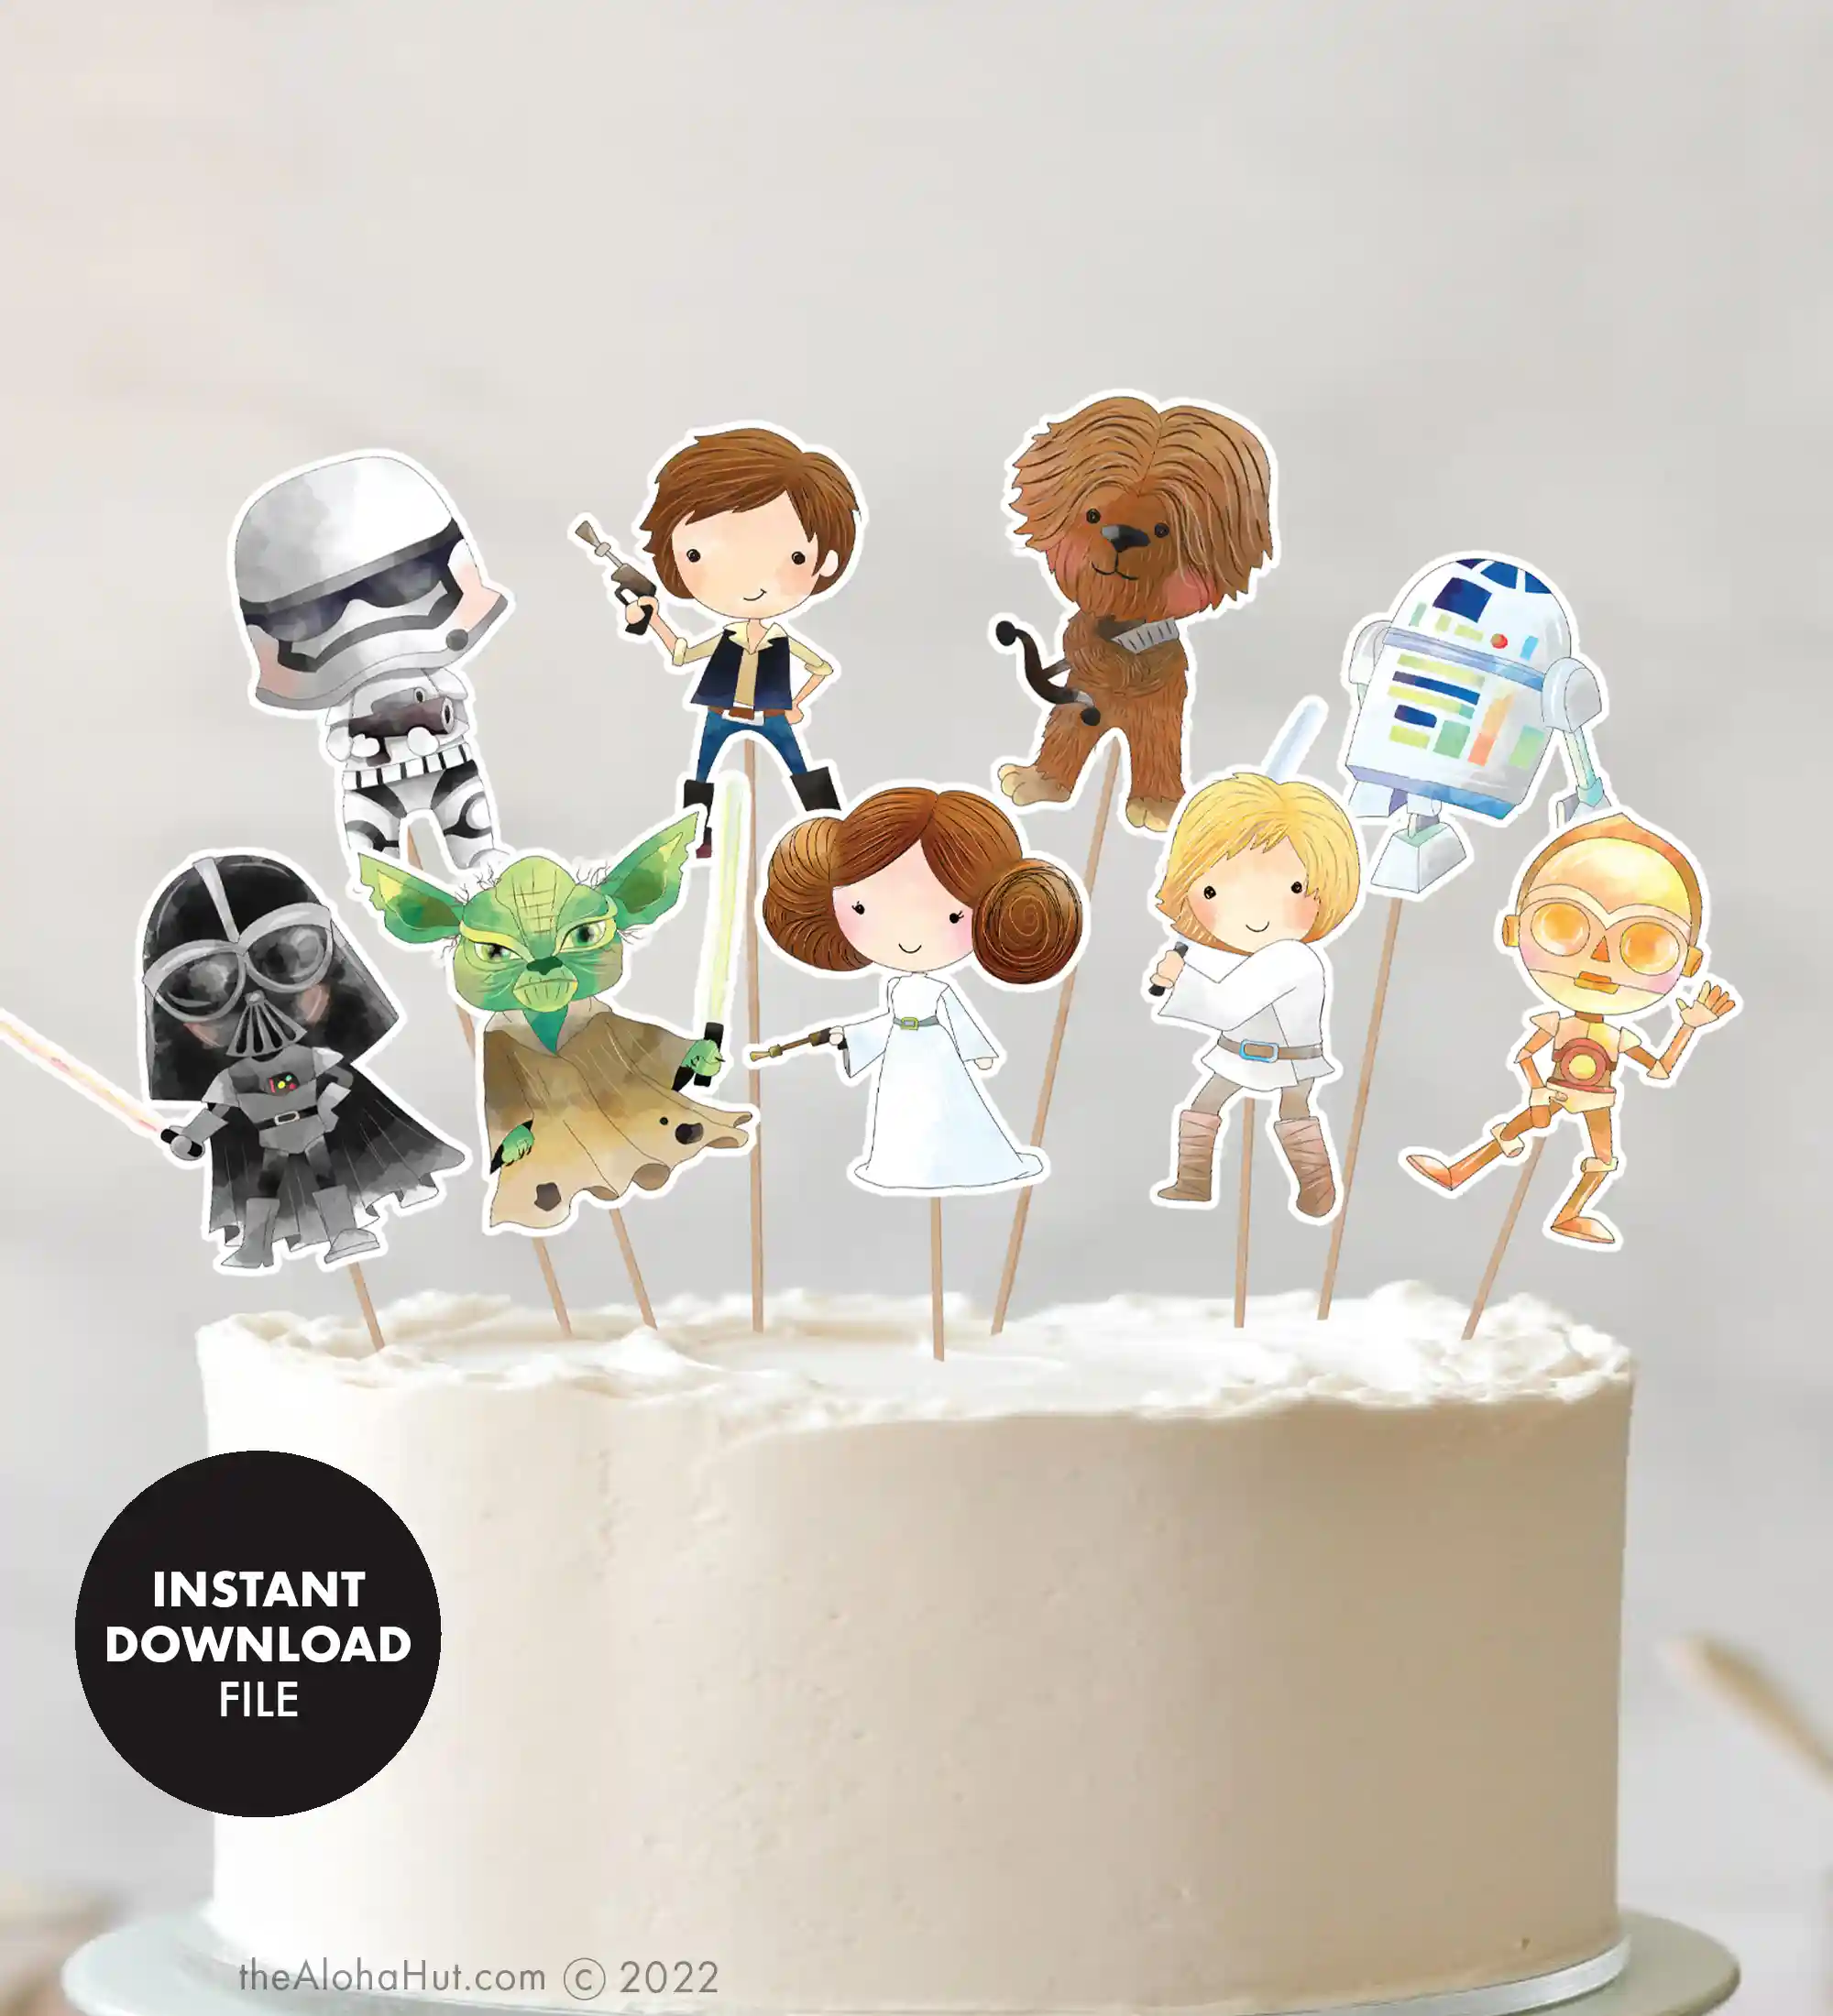 Star Wars party ideas, activities, birthday party games, decorations, and prints. Ideas and tips and tricks for throwing the best Star Wars themed kids birthday party, baby shower, or one with the force celebration. Includes Star Wars printable games, decorations (cupcake toppers, banners, gift tags, characters) and Star Wars party games (BINGO, scavenger hunt, pin the lightsaber on Yoda or Darth Vader). Star wars cupcake toppers and tags. Or easy star wars themed cake idea.